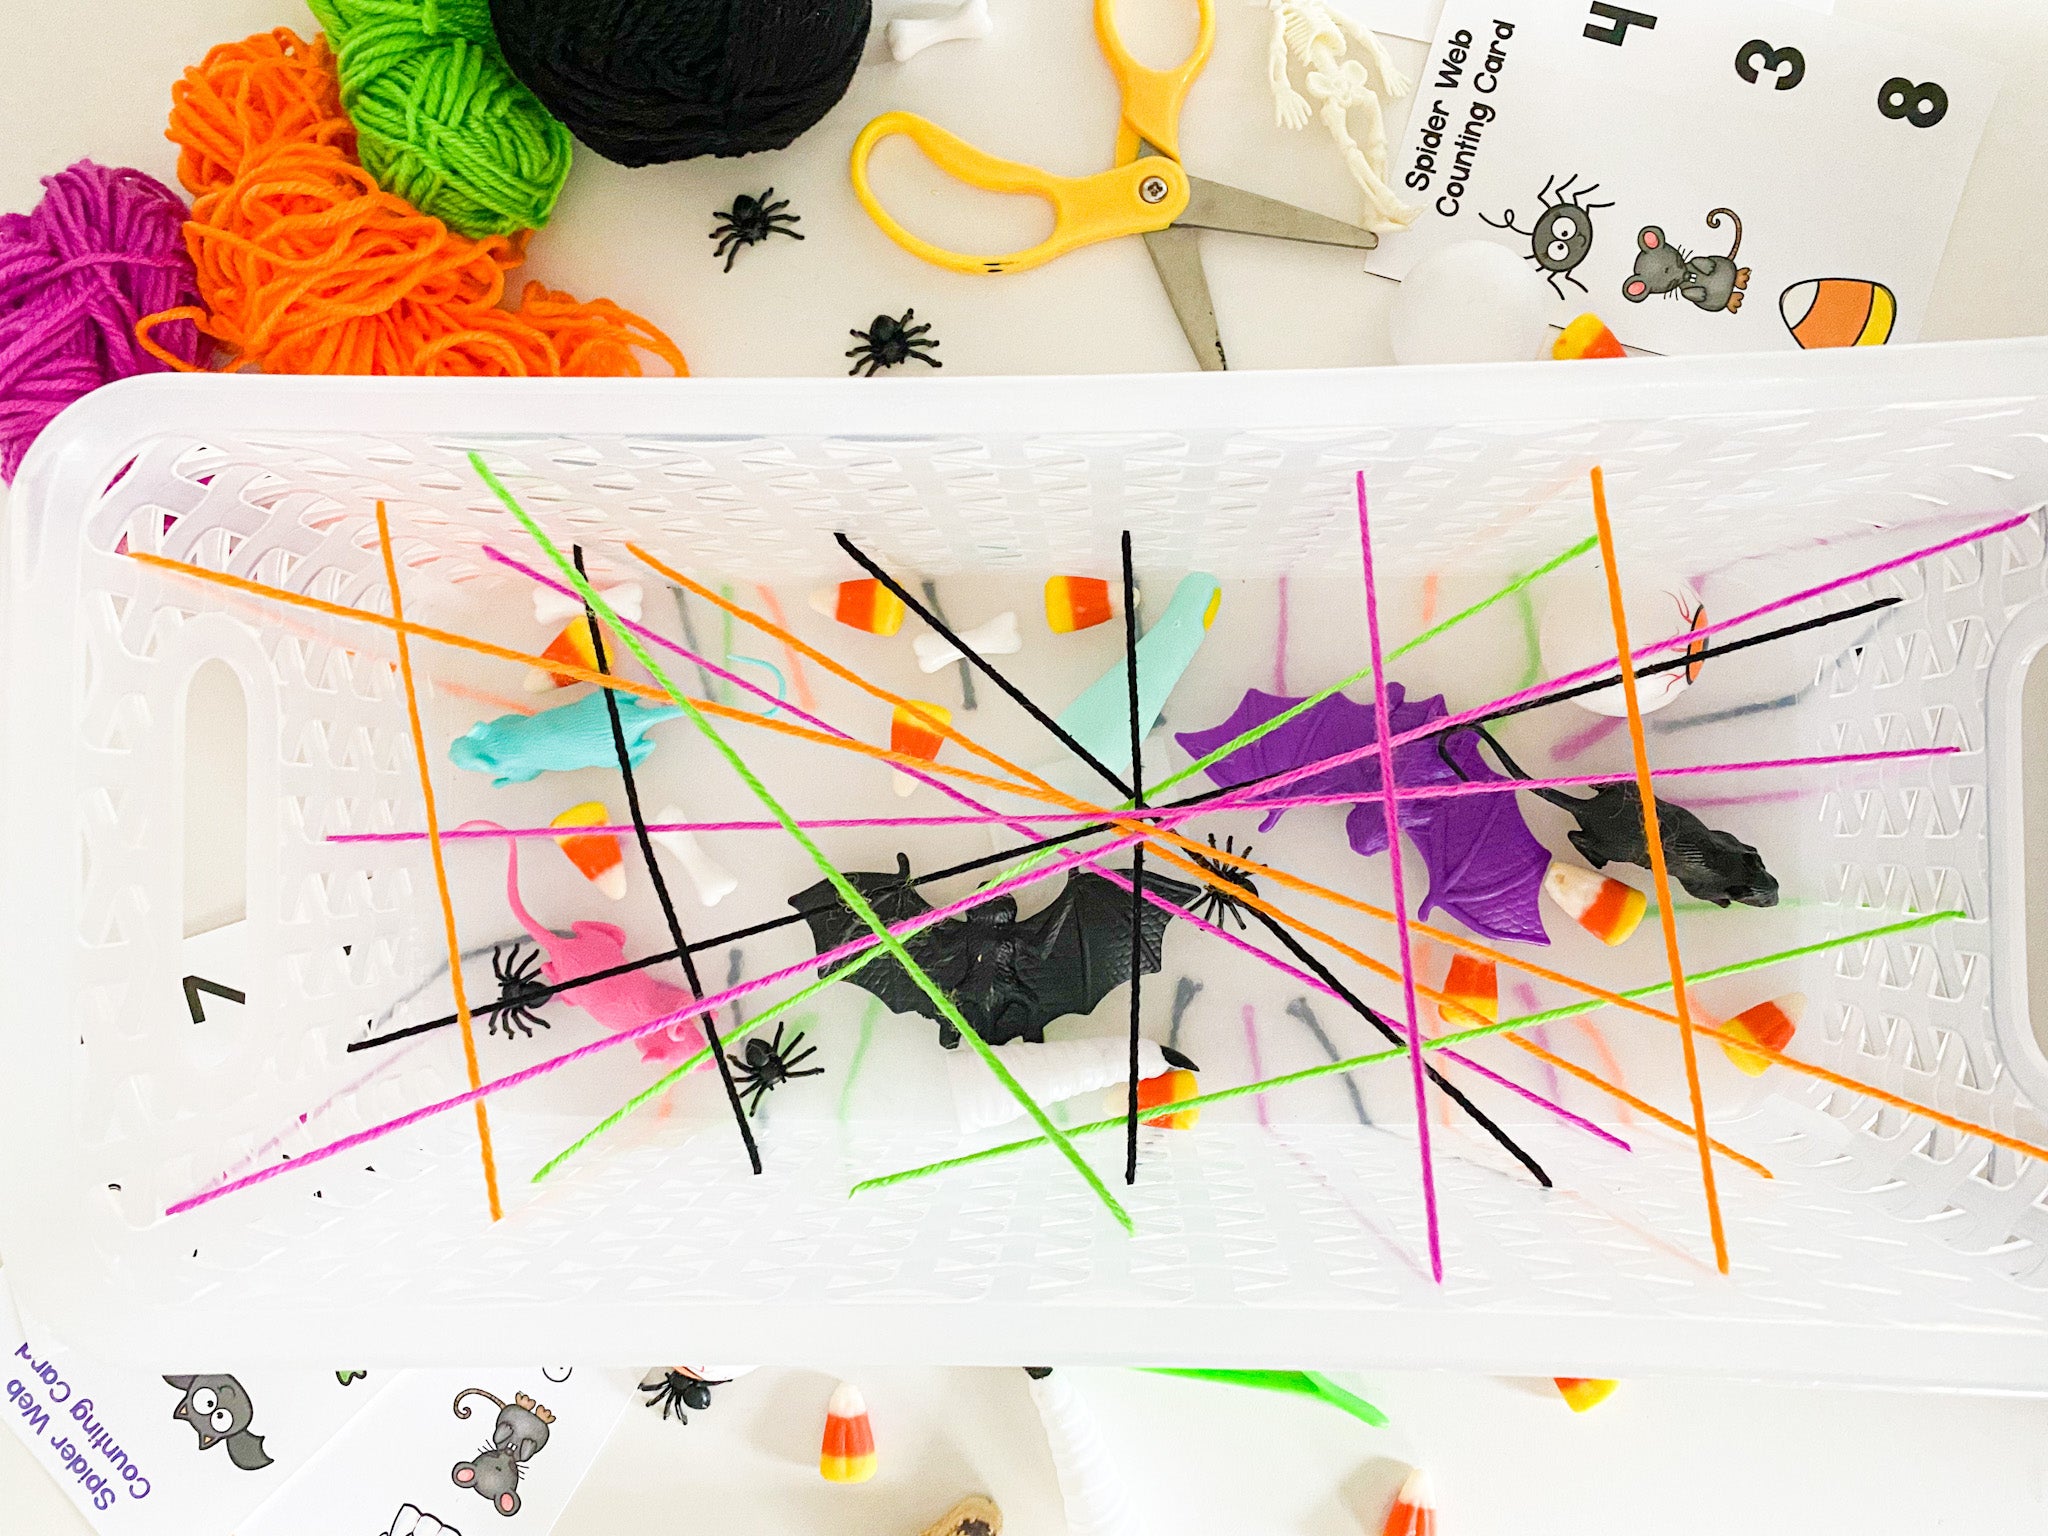 Spider web activity in progress; colored string through basket with candy and toys underneath, with printable and scissors beside it on a table